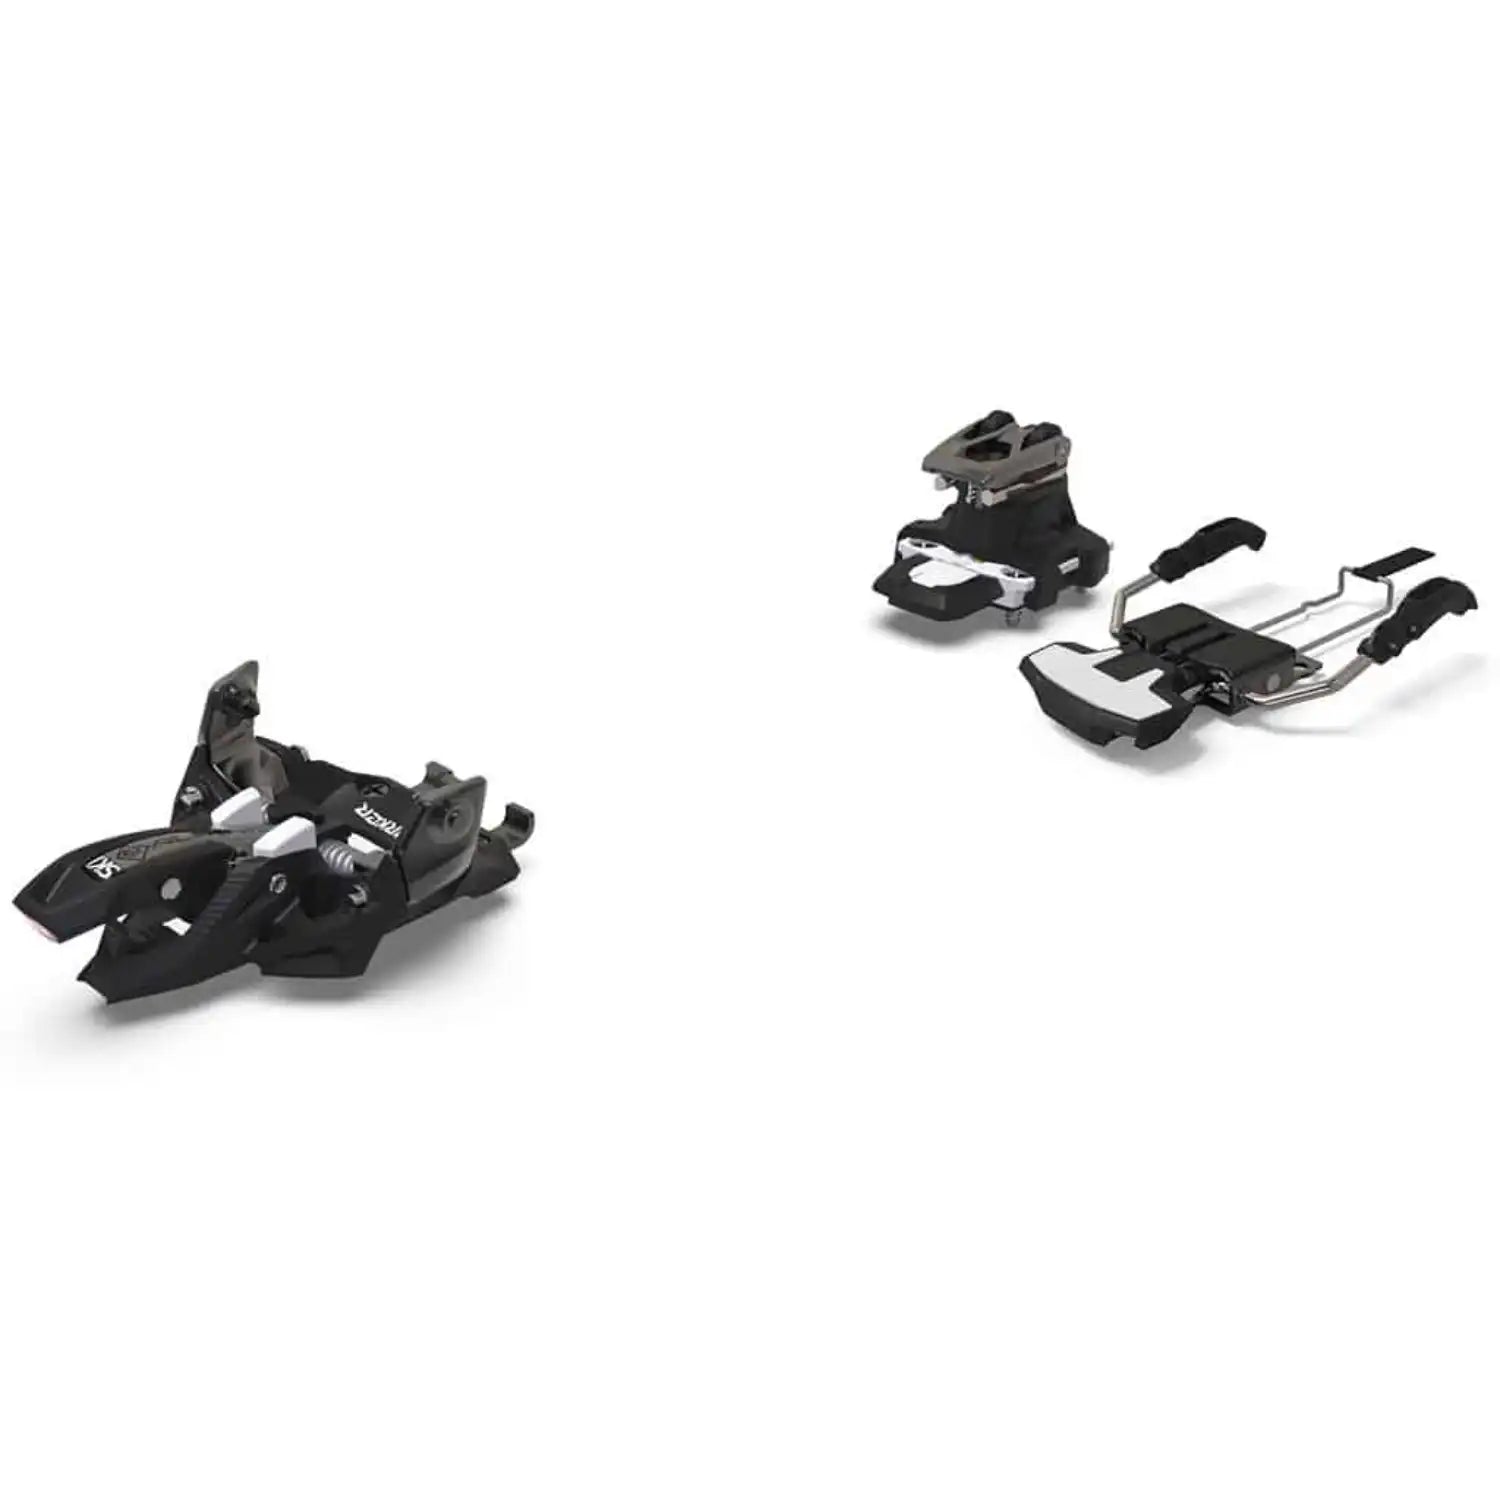 Alpinist 10 Incl. Stopper Alpine Touring Bindings